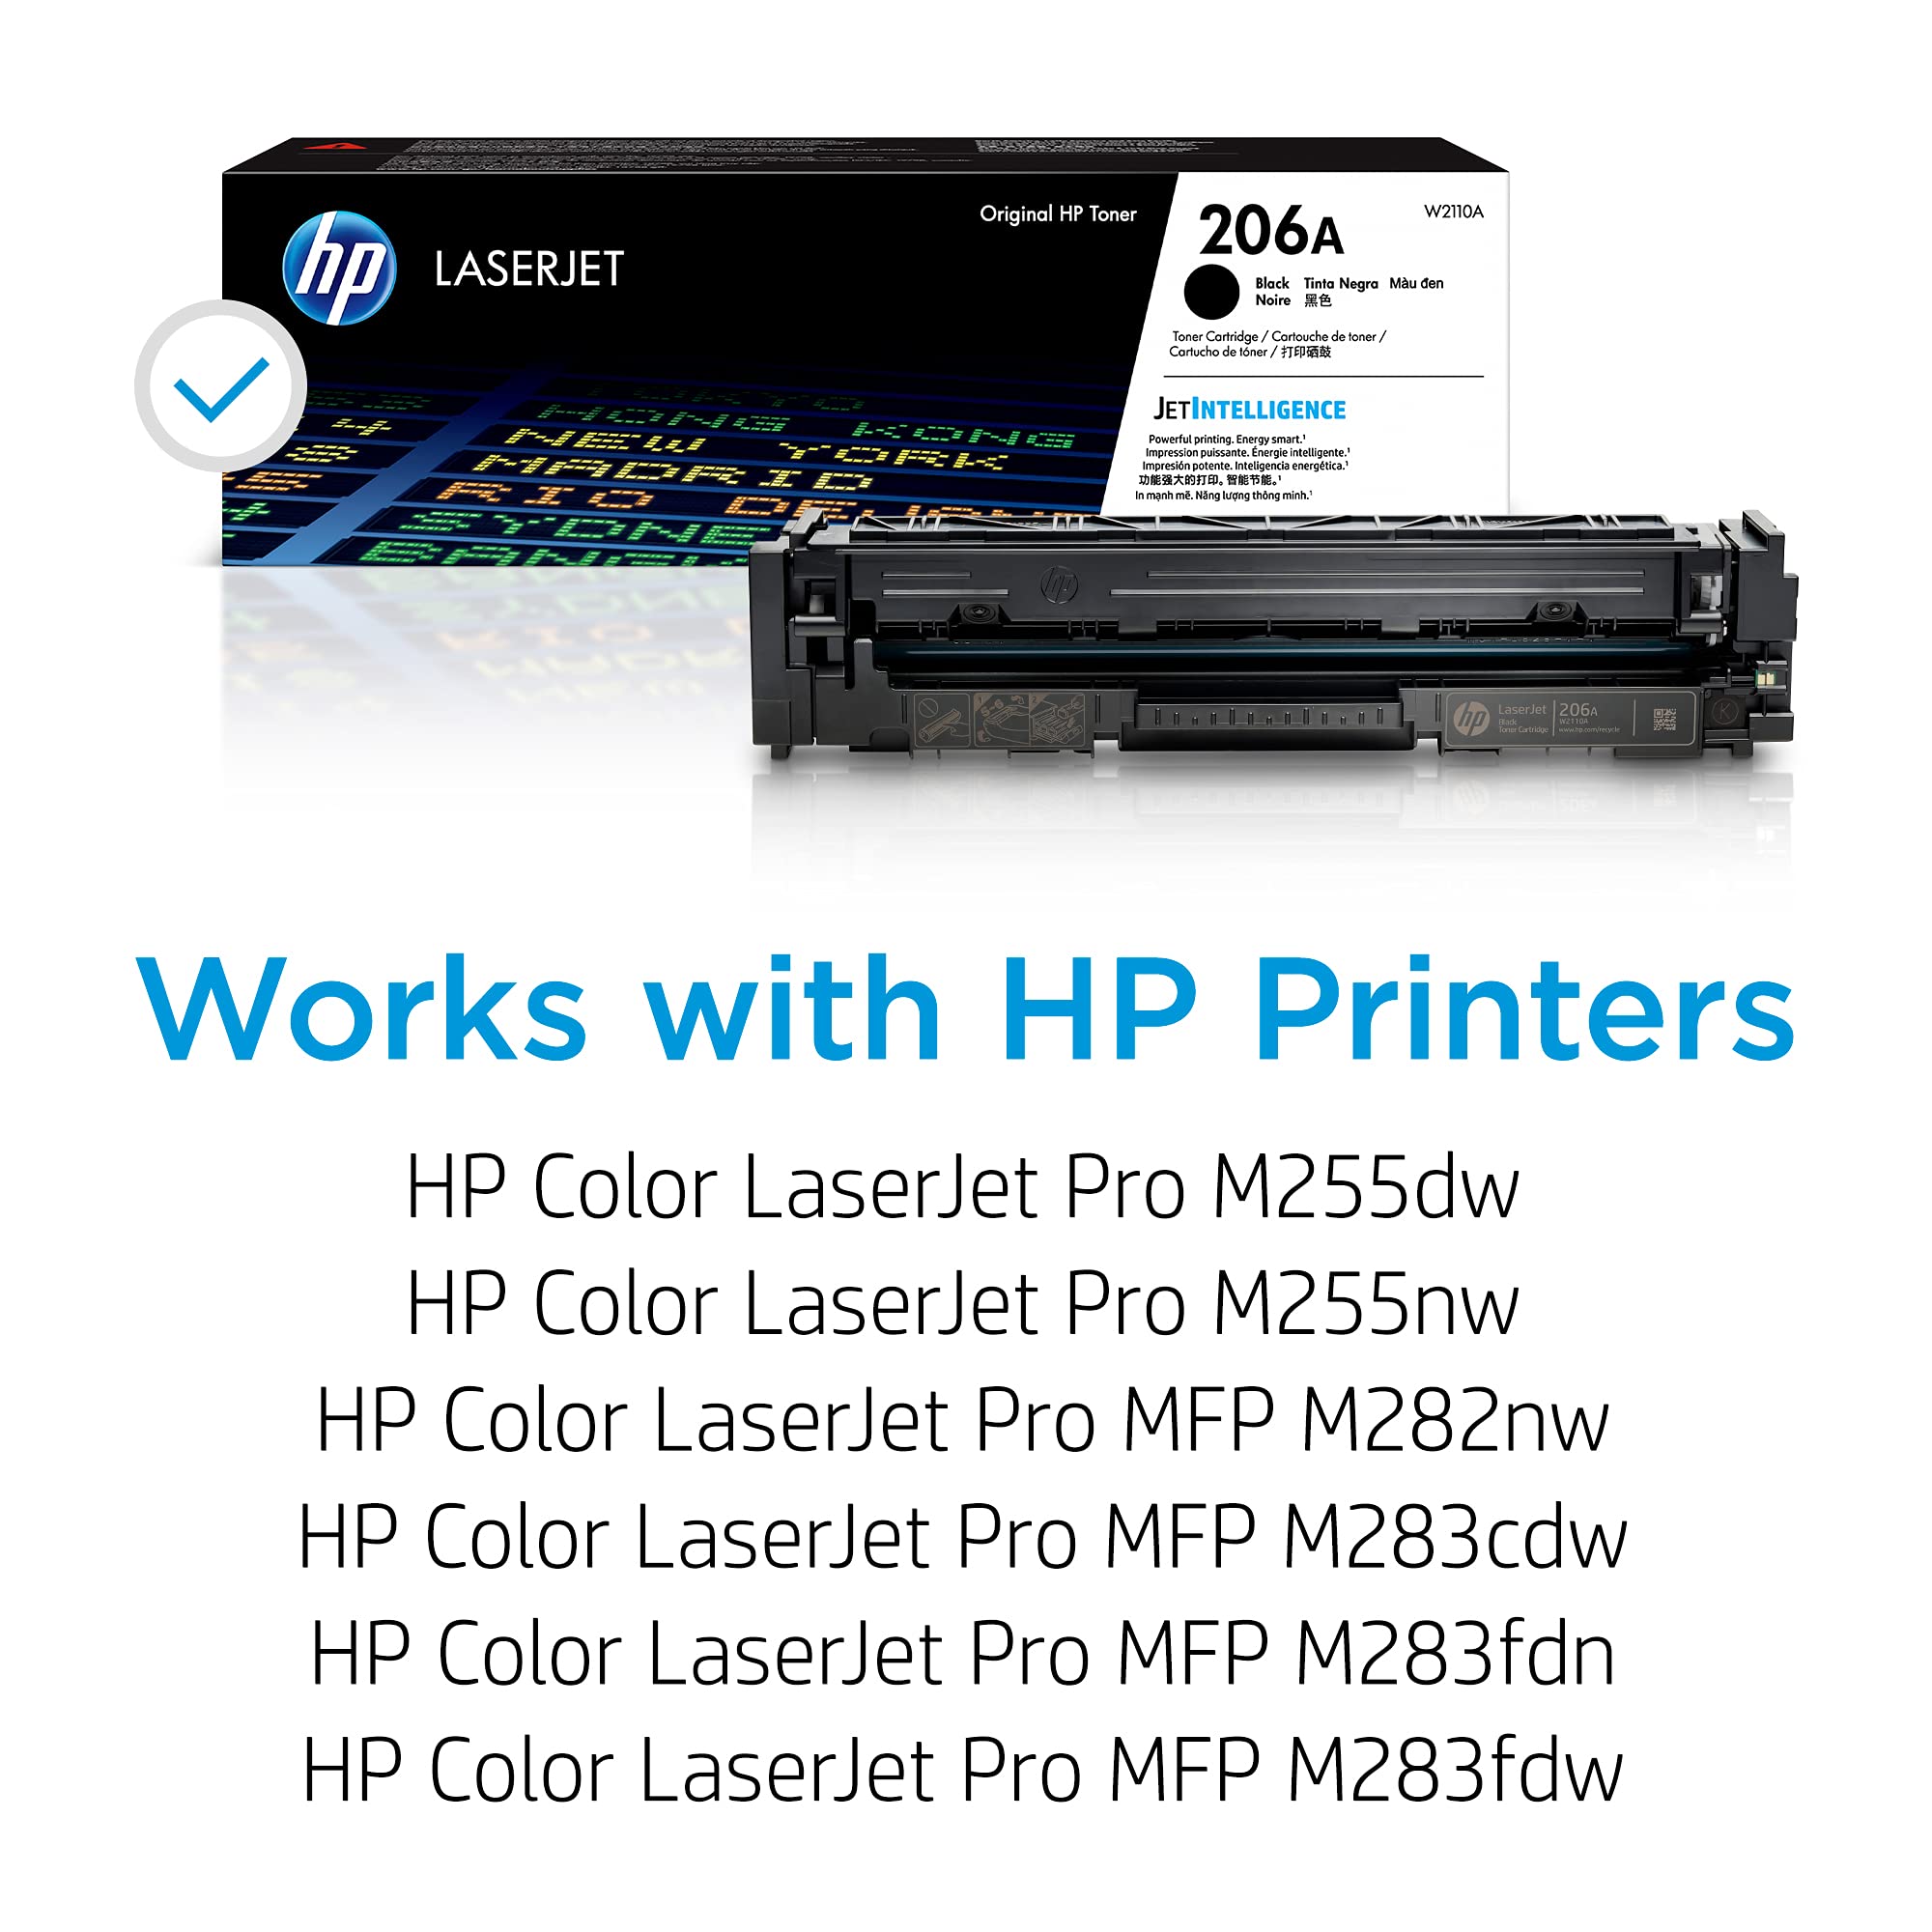 HP 206A Black Toner Cartridge | Works with HP Color LaserJet Pro M255, HP Color LaserJet Pro MFP M282, M283 Series | W2110A